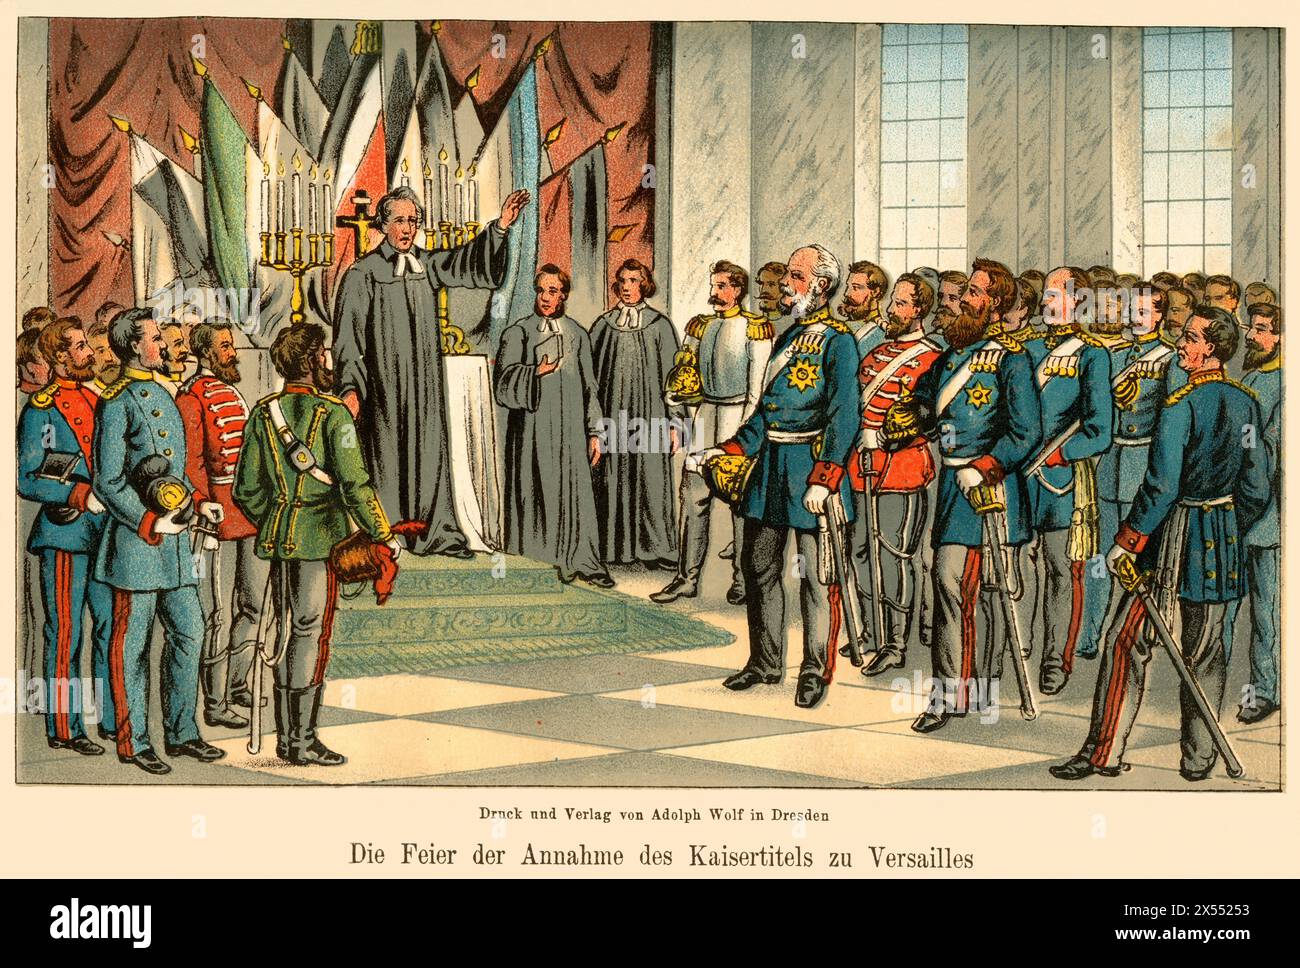 events, Versailles, Franco-Prussion war, 1870-1871, ARTIST'S COPYRIGHT HAS NOT TO BE CLEARED Stock Photo